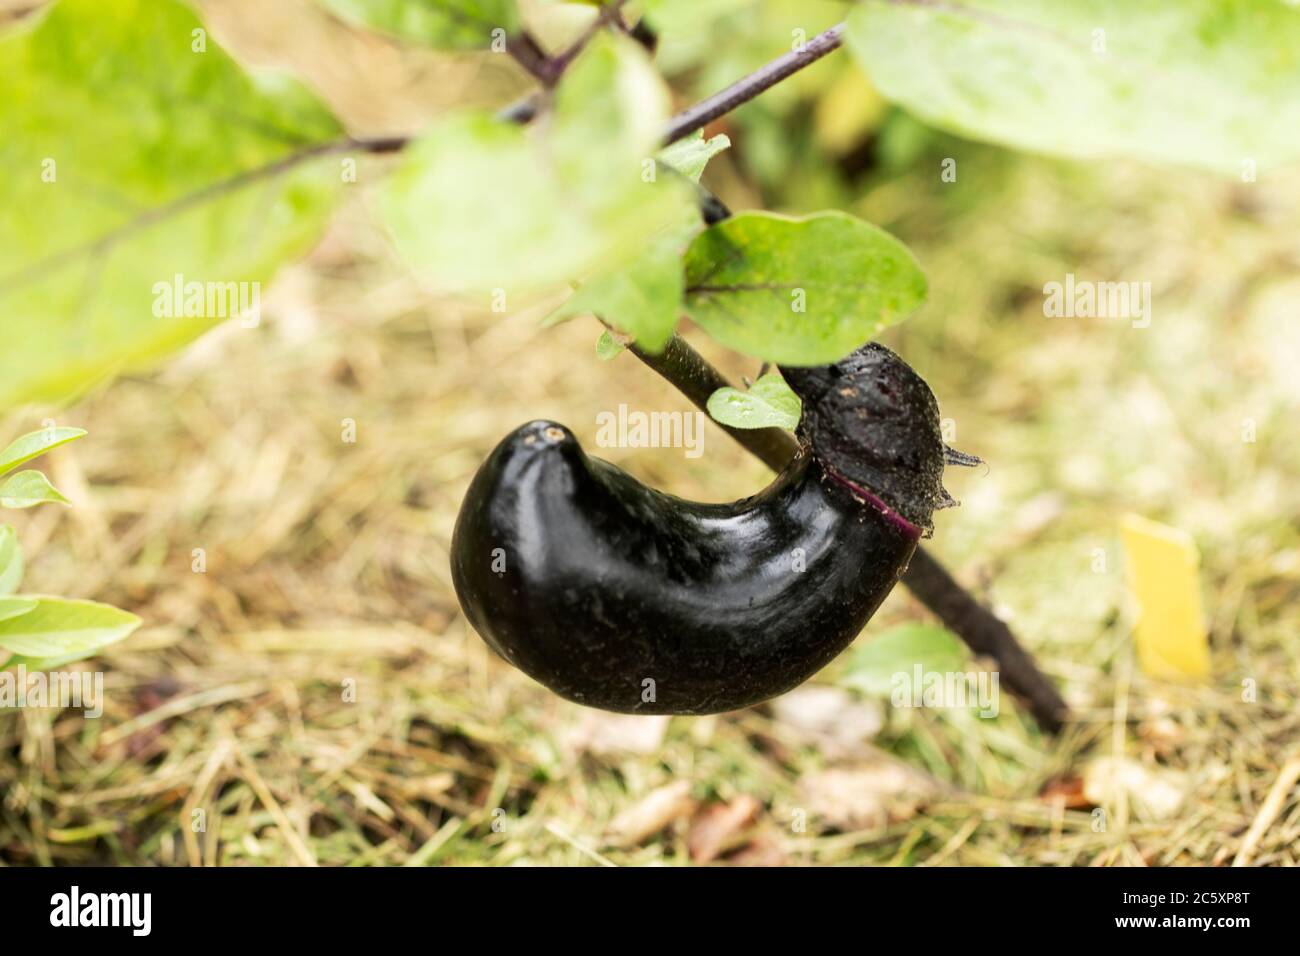 An eggplant (Solanum melongena) in variety Millionaire, growing on a vine in a vegetable garden. Stock Photo